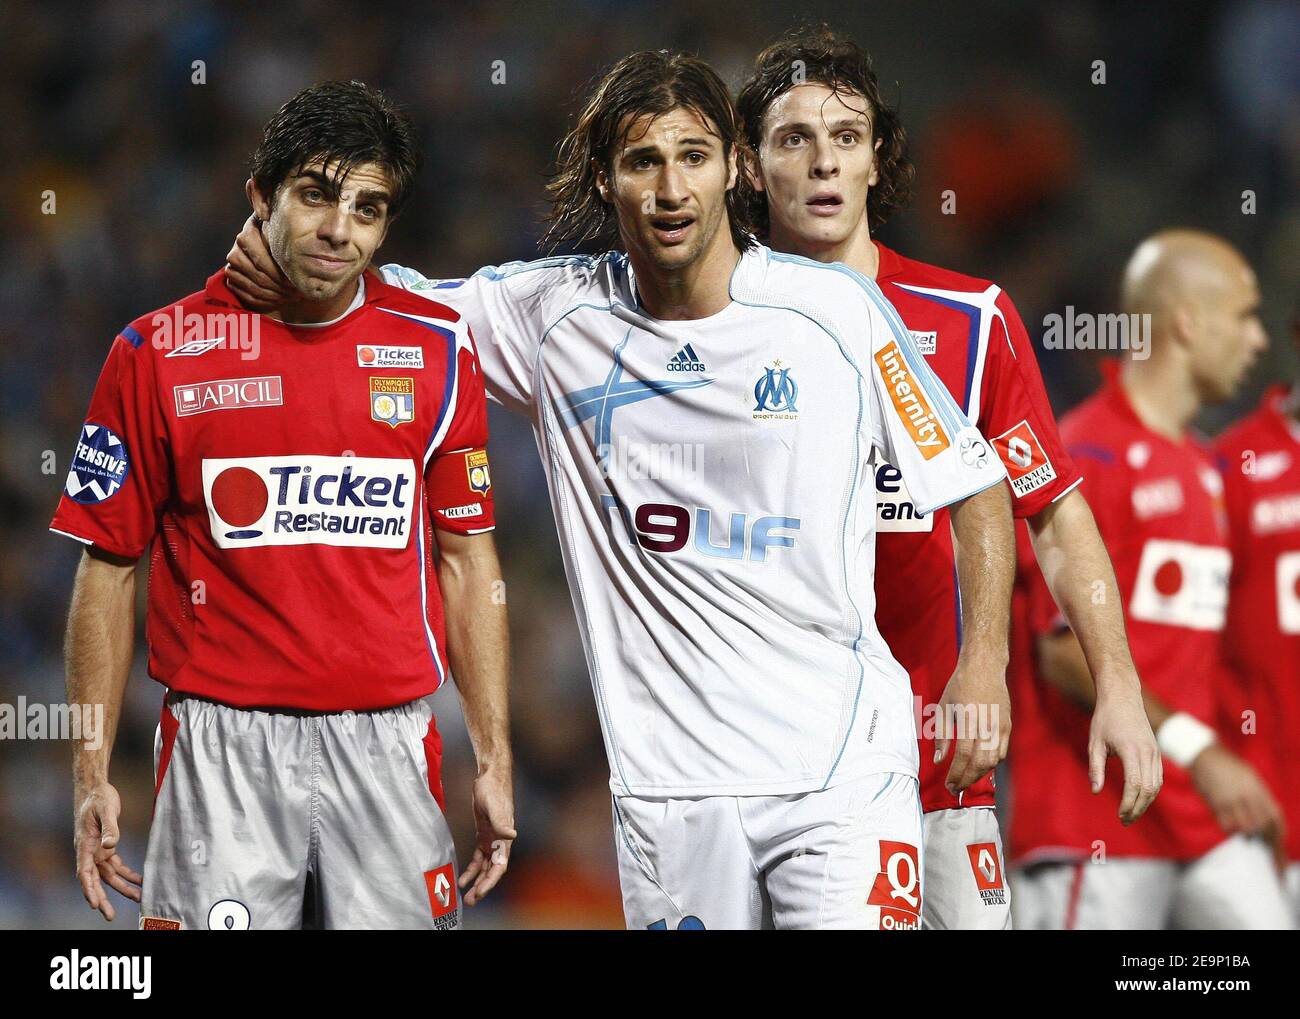 Lyon's Juninho and Marseille's Lorik Cana during the French first league football match, Olympique de Marseille vs Olympique Lyonnais, at the Velodrome stadium, in Marseille, France, on October 22, 2006. Lyon won 4-1. Photo by Christian Liewig/ABACAPRESS.COM Stock Photo